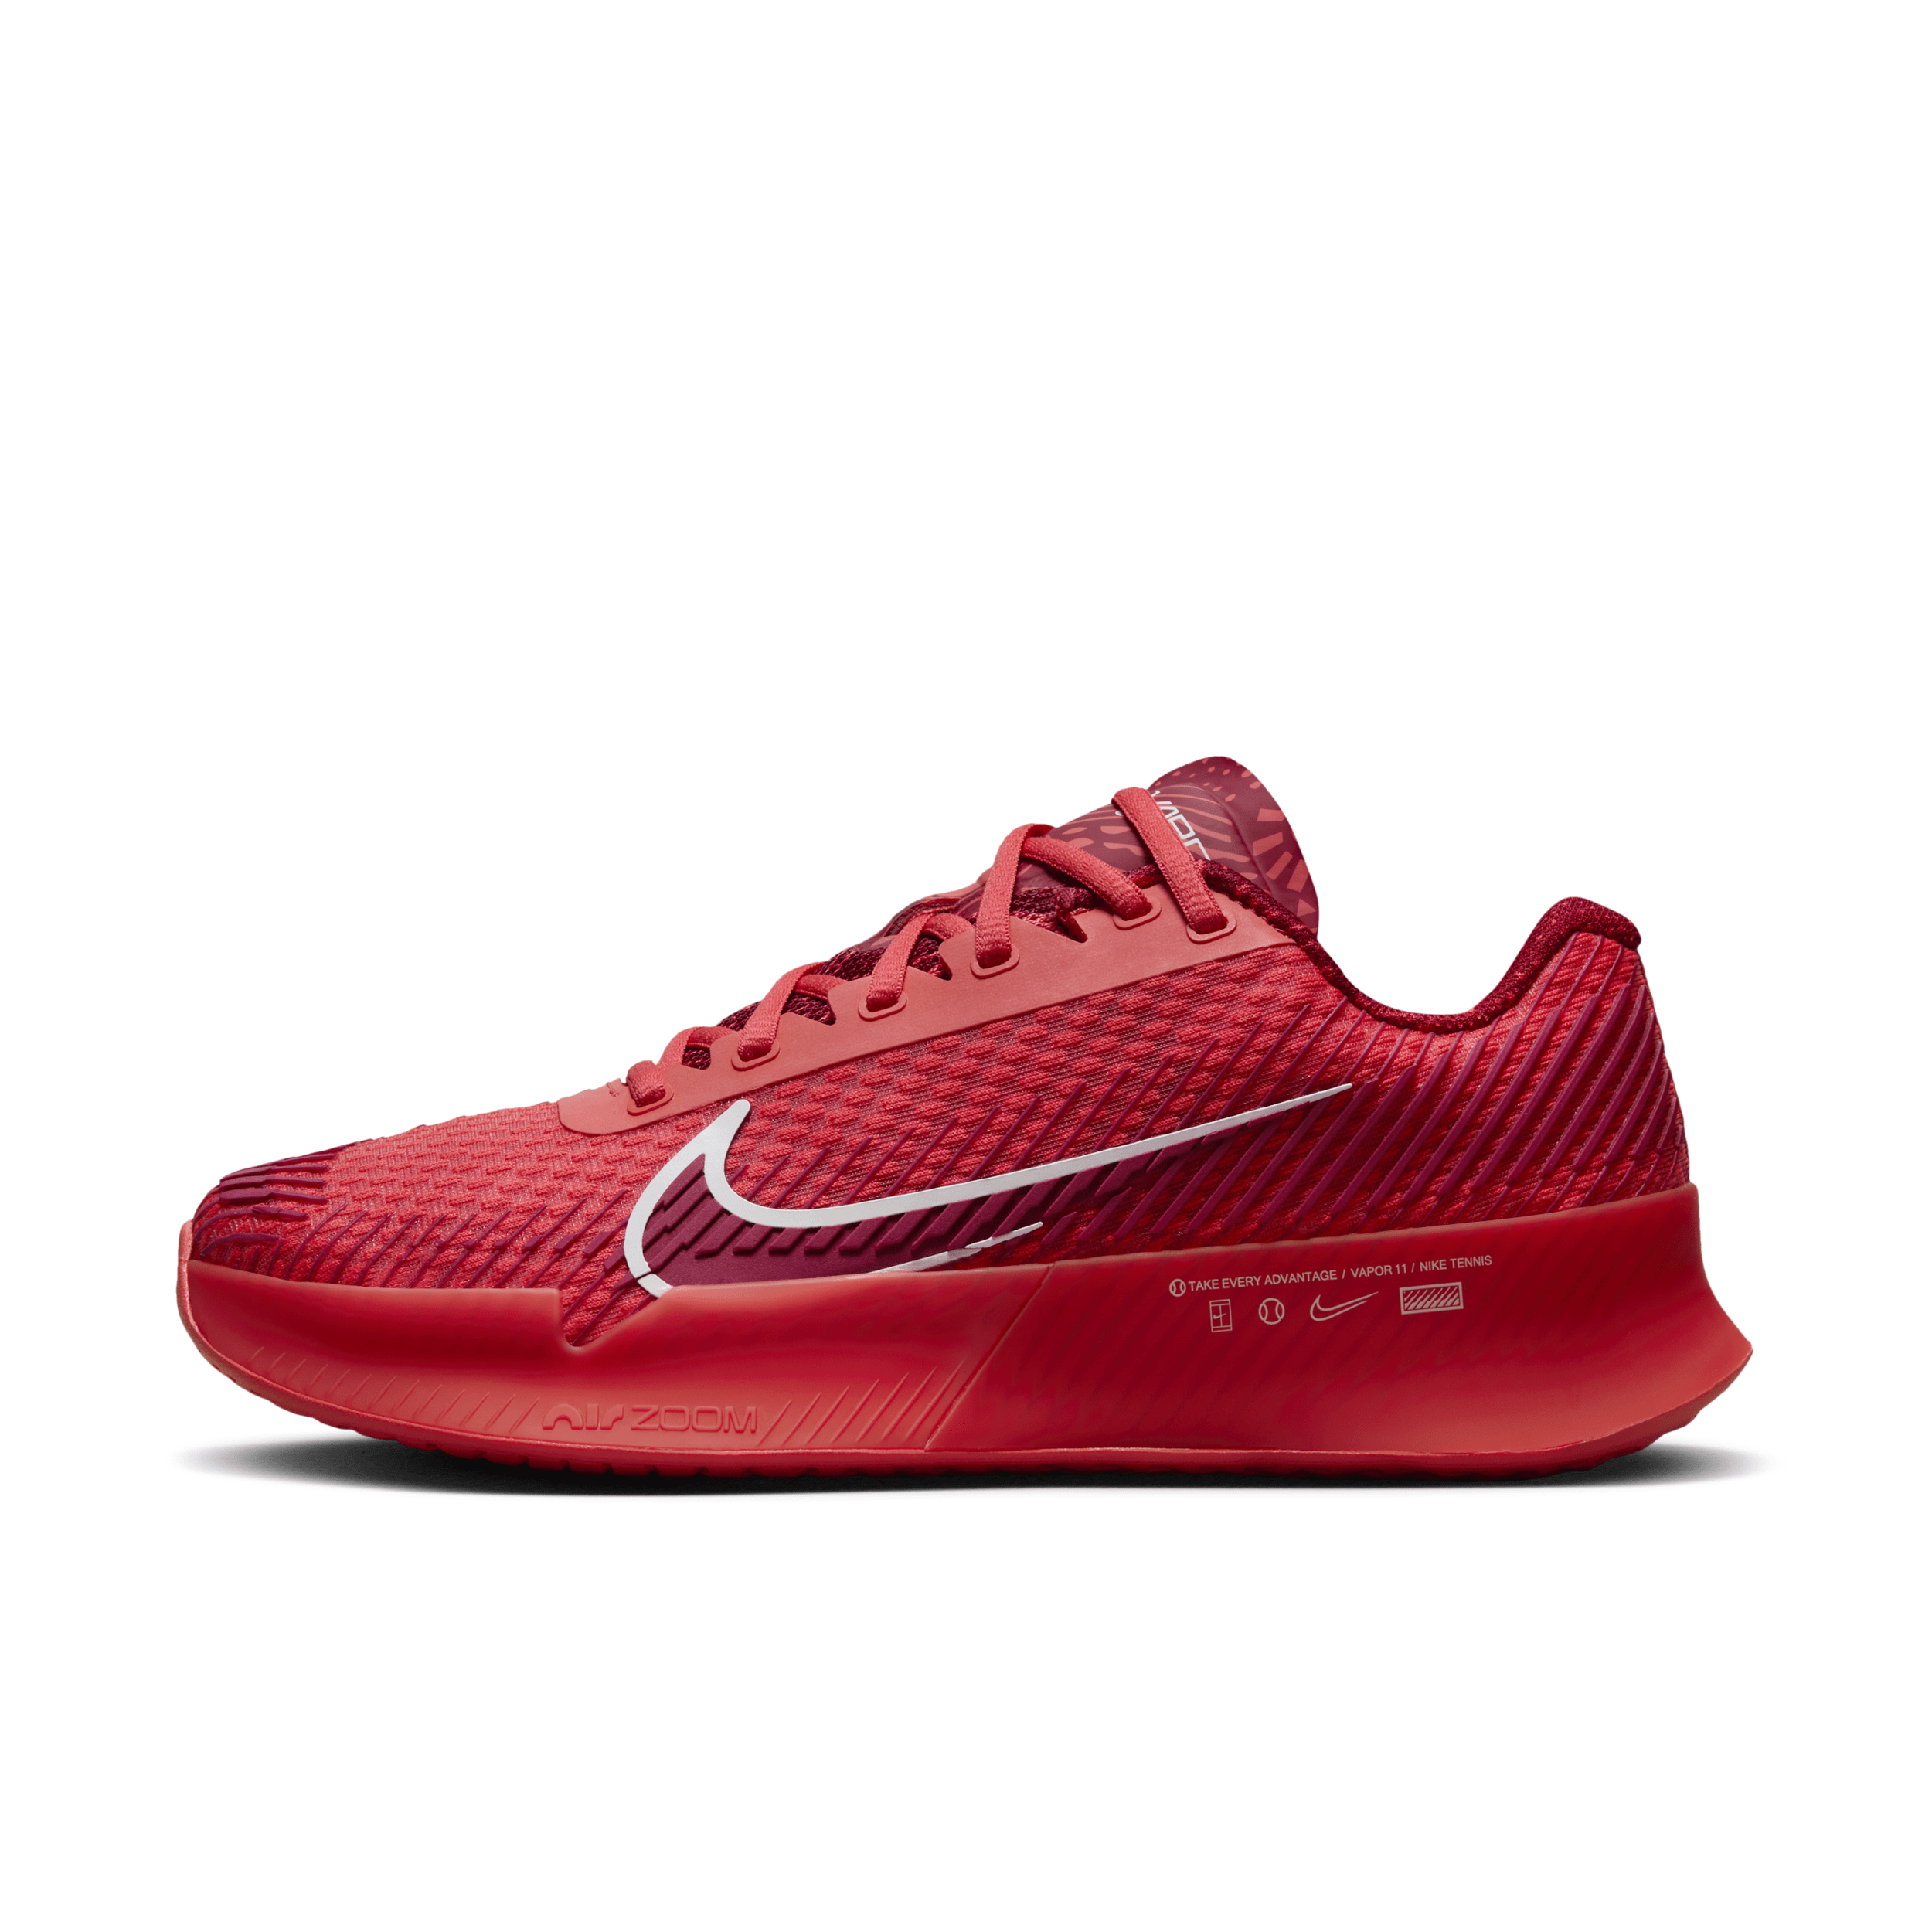 Nike Women's Court Air Zoom Vapor 11 Hard Court Tennis Shoes In Red